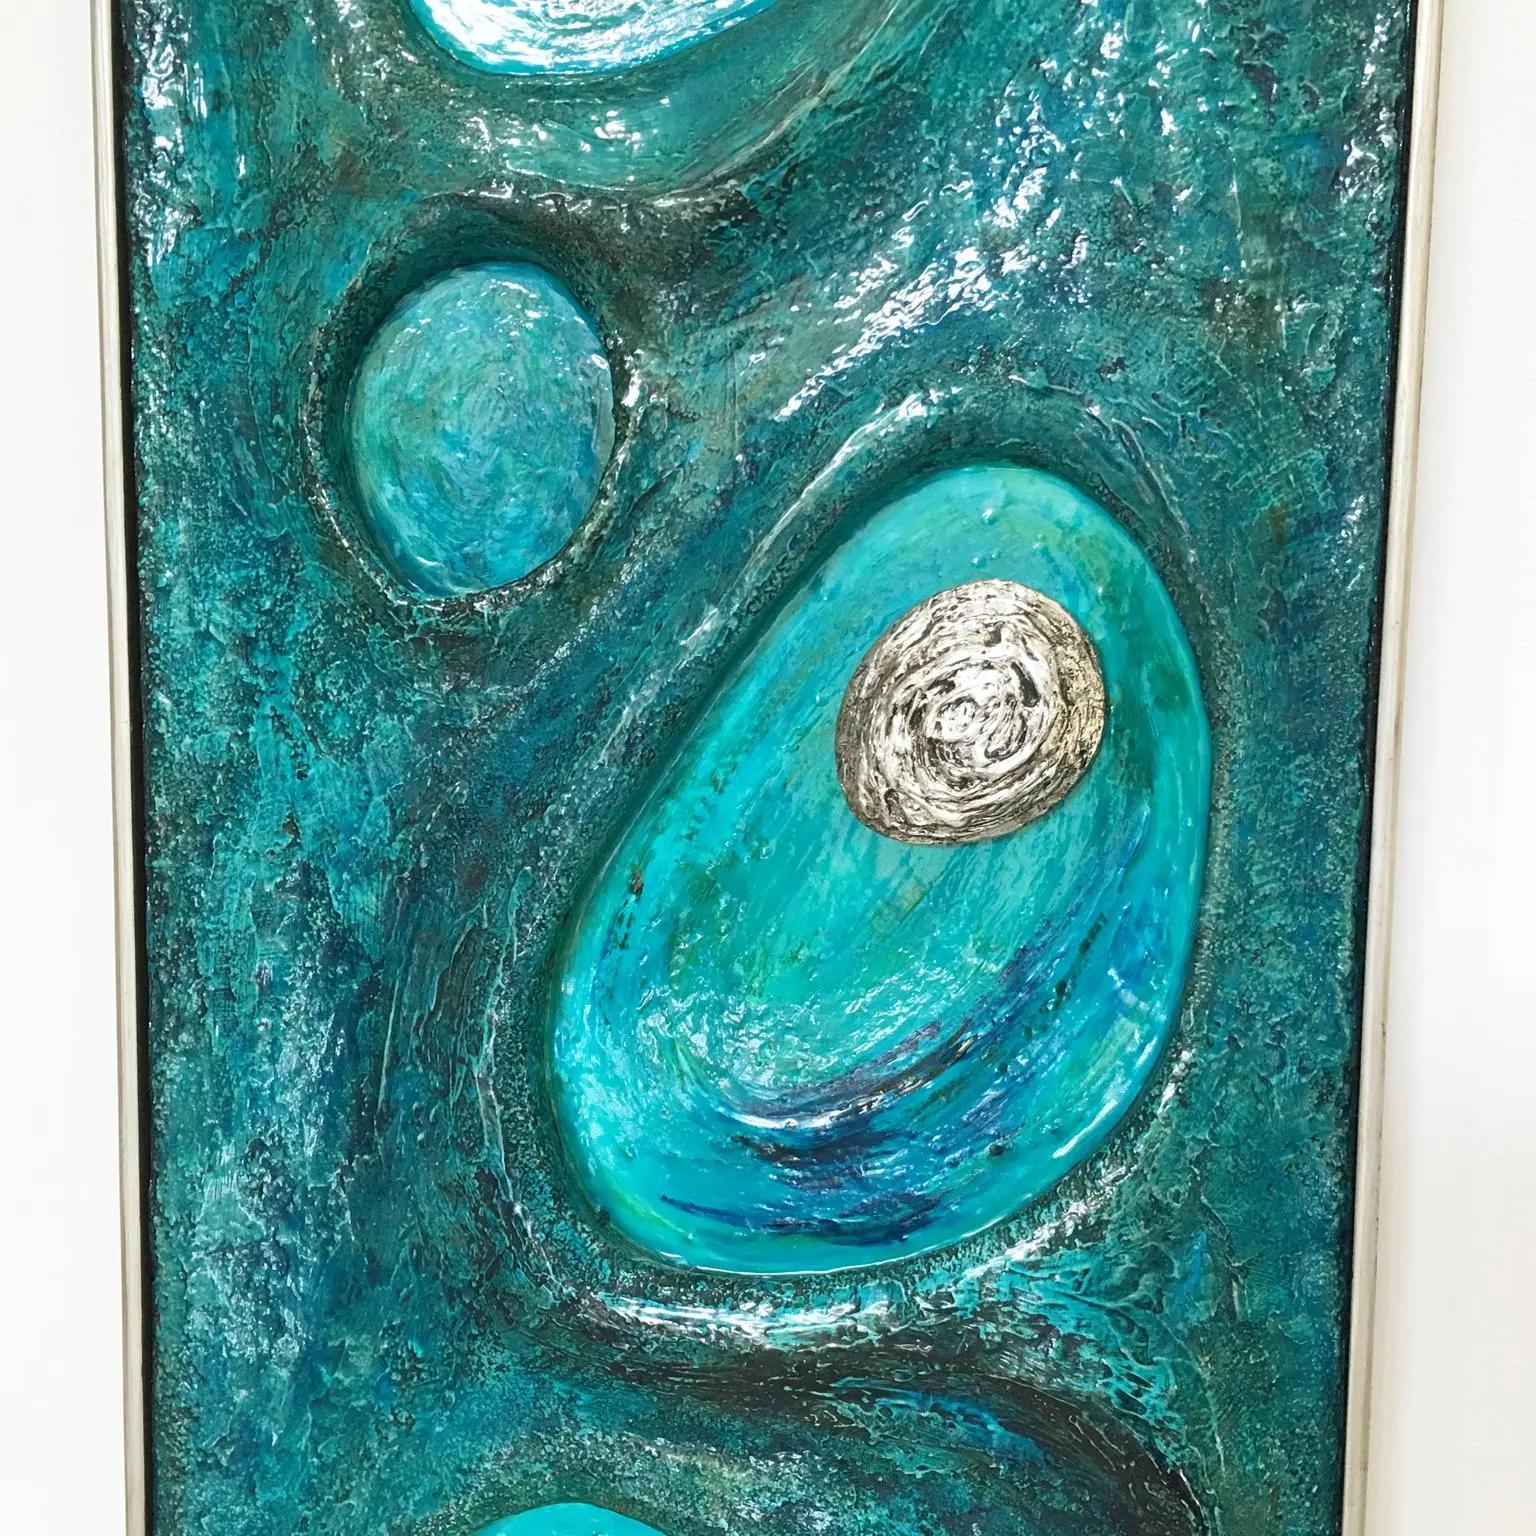 Mid-20th Century Lorraine Stelzer Turquoise Acrylic Resin Psychedelic Art Wall Sculpture Panel For Sale